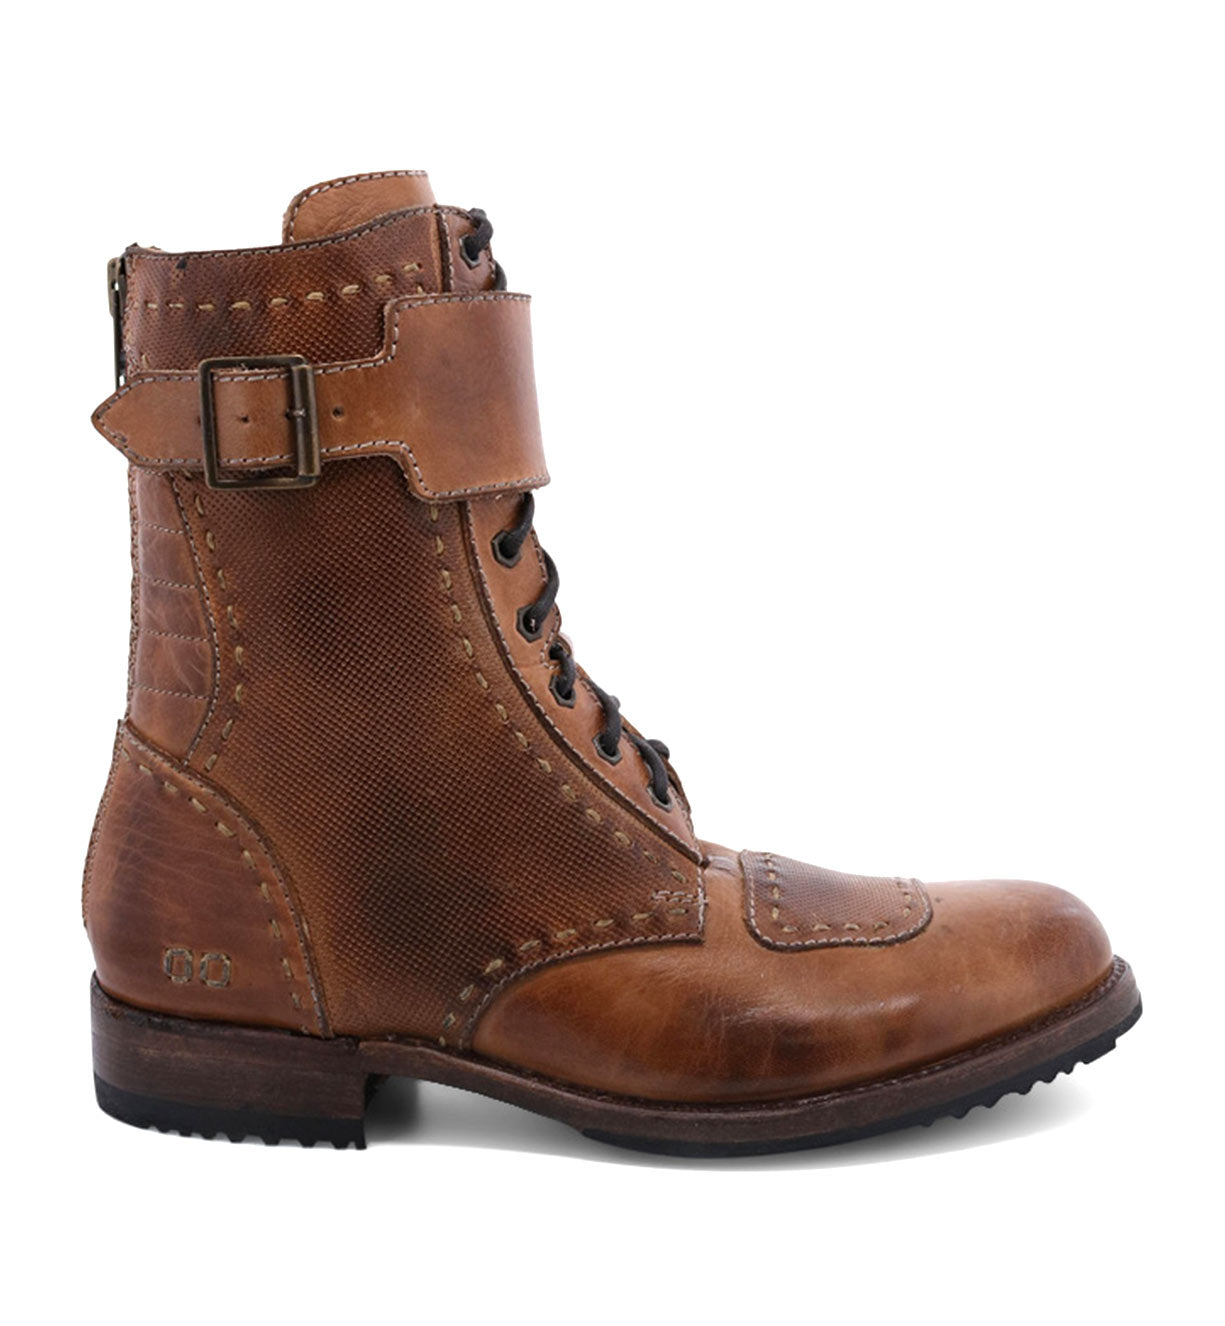 A men's Walker brown leather boot with a buckle on the side by Bed Stu.